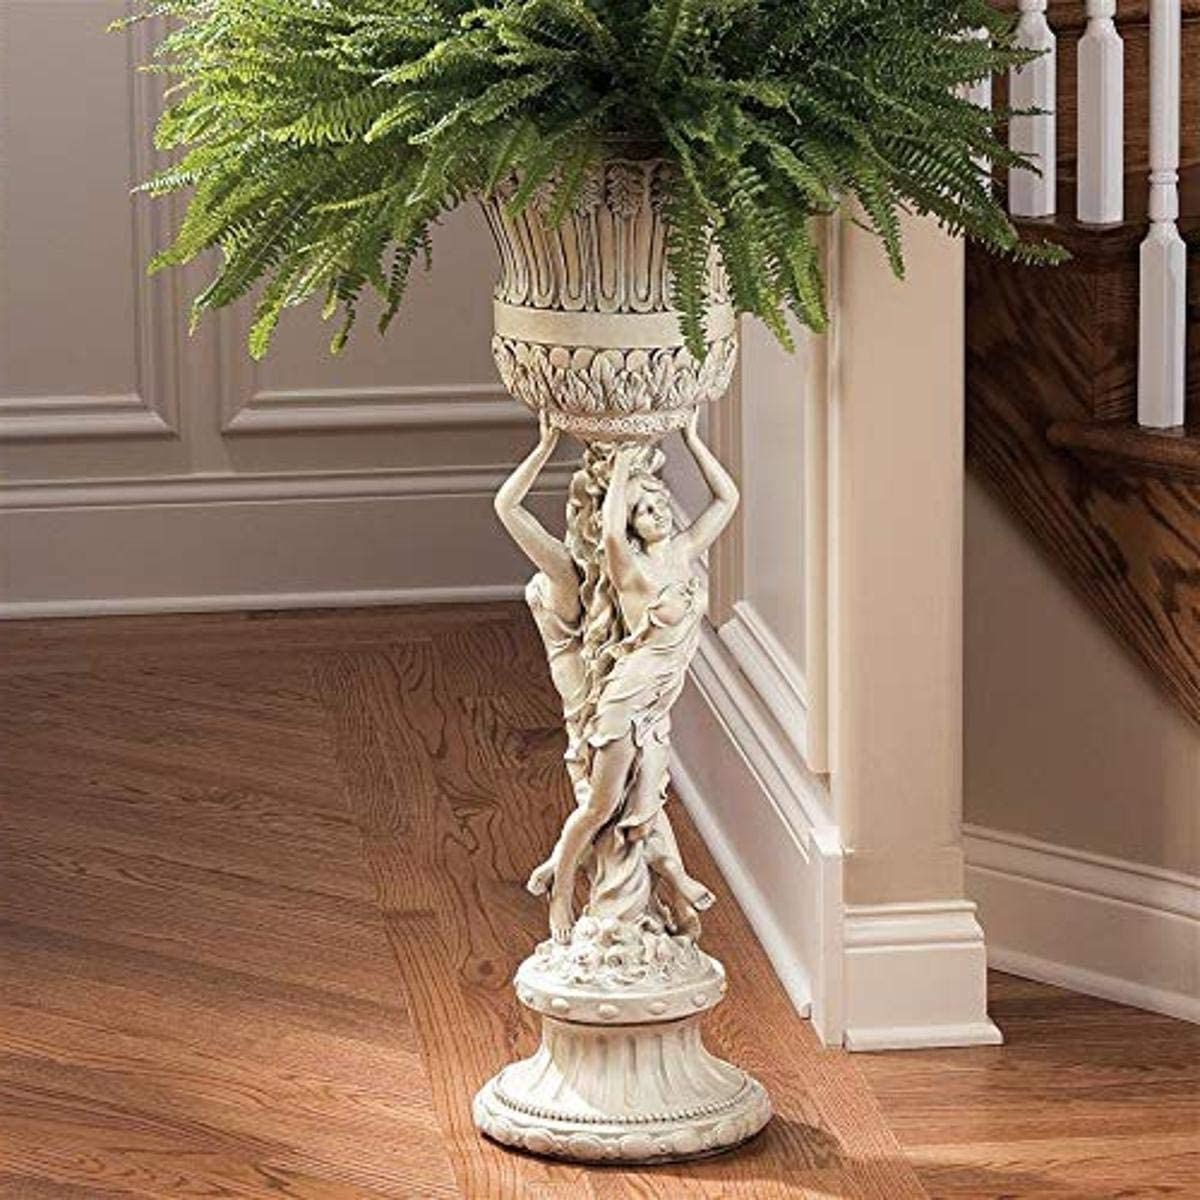 Stone Plant Stands With Fashionable Design Toscano Ky9055 Les Filles Joyeuses Pedestal Column Plant Stand With  Urn, Polyresin, Antique Stone, 91.5 Cm : Amazon.co (View 1 of 15)